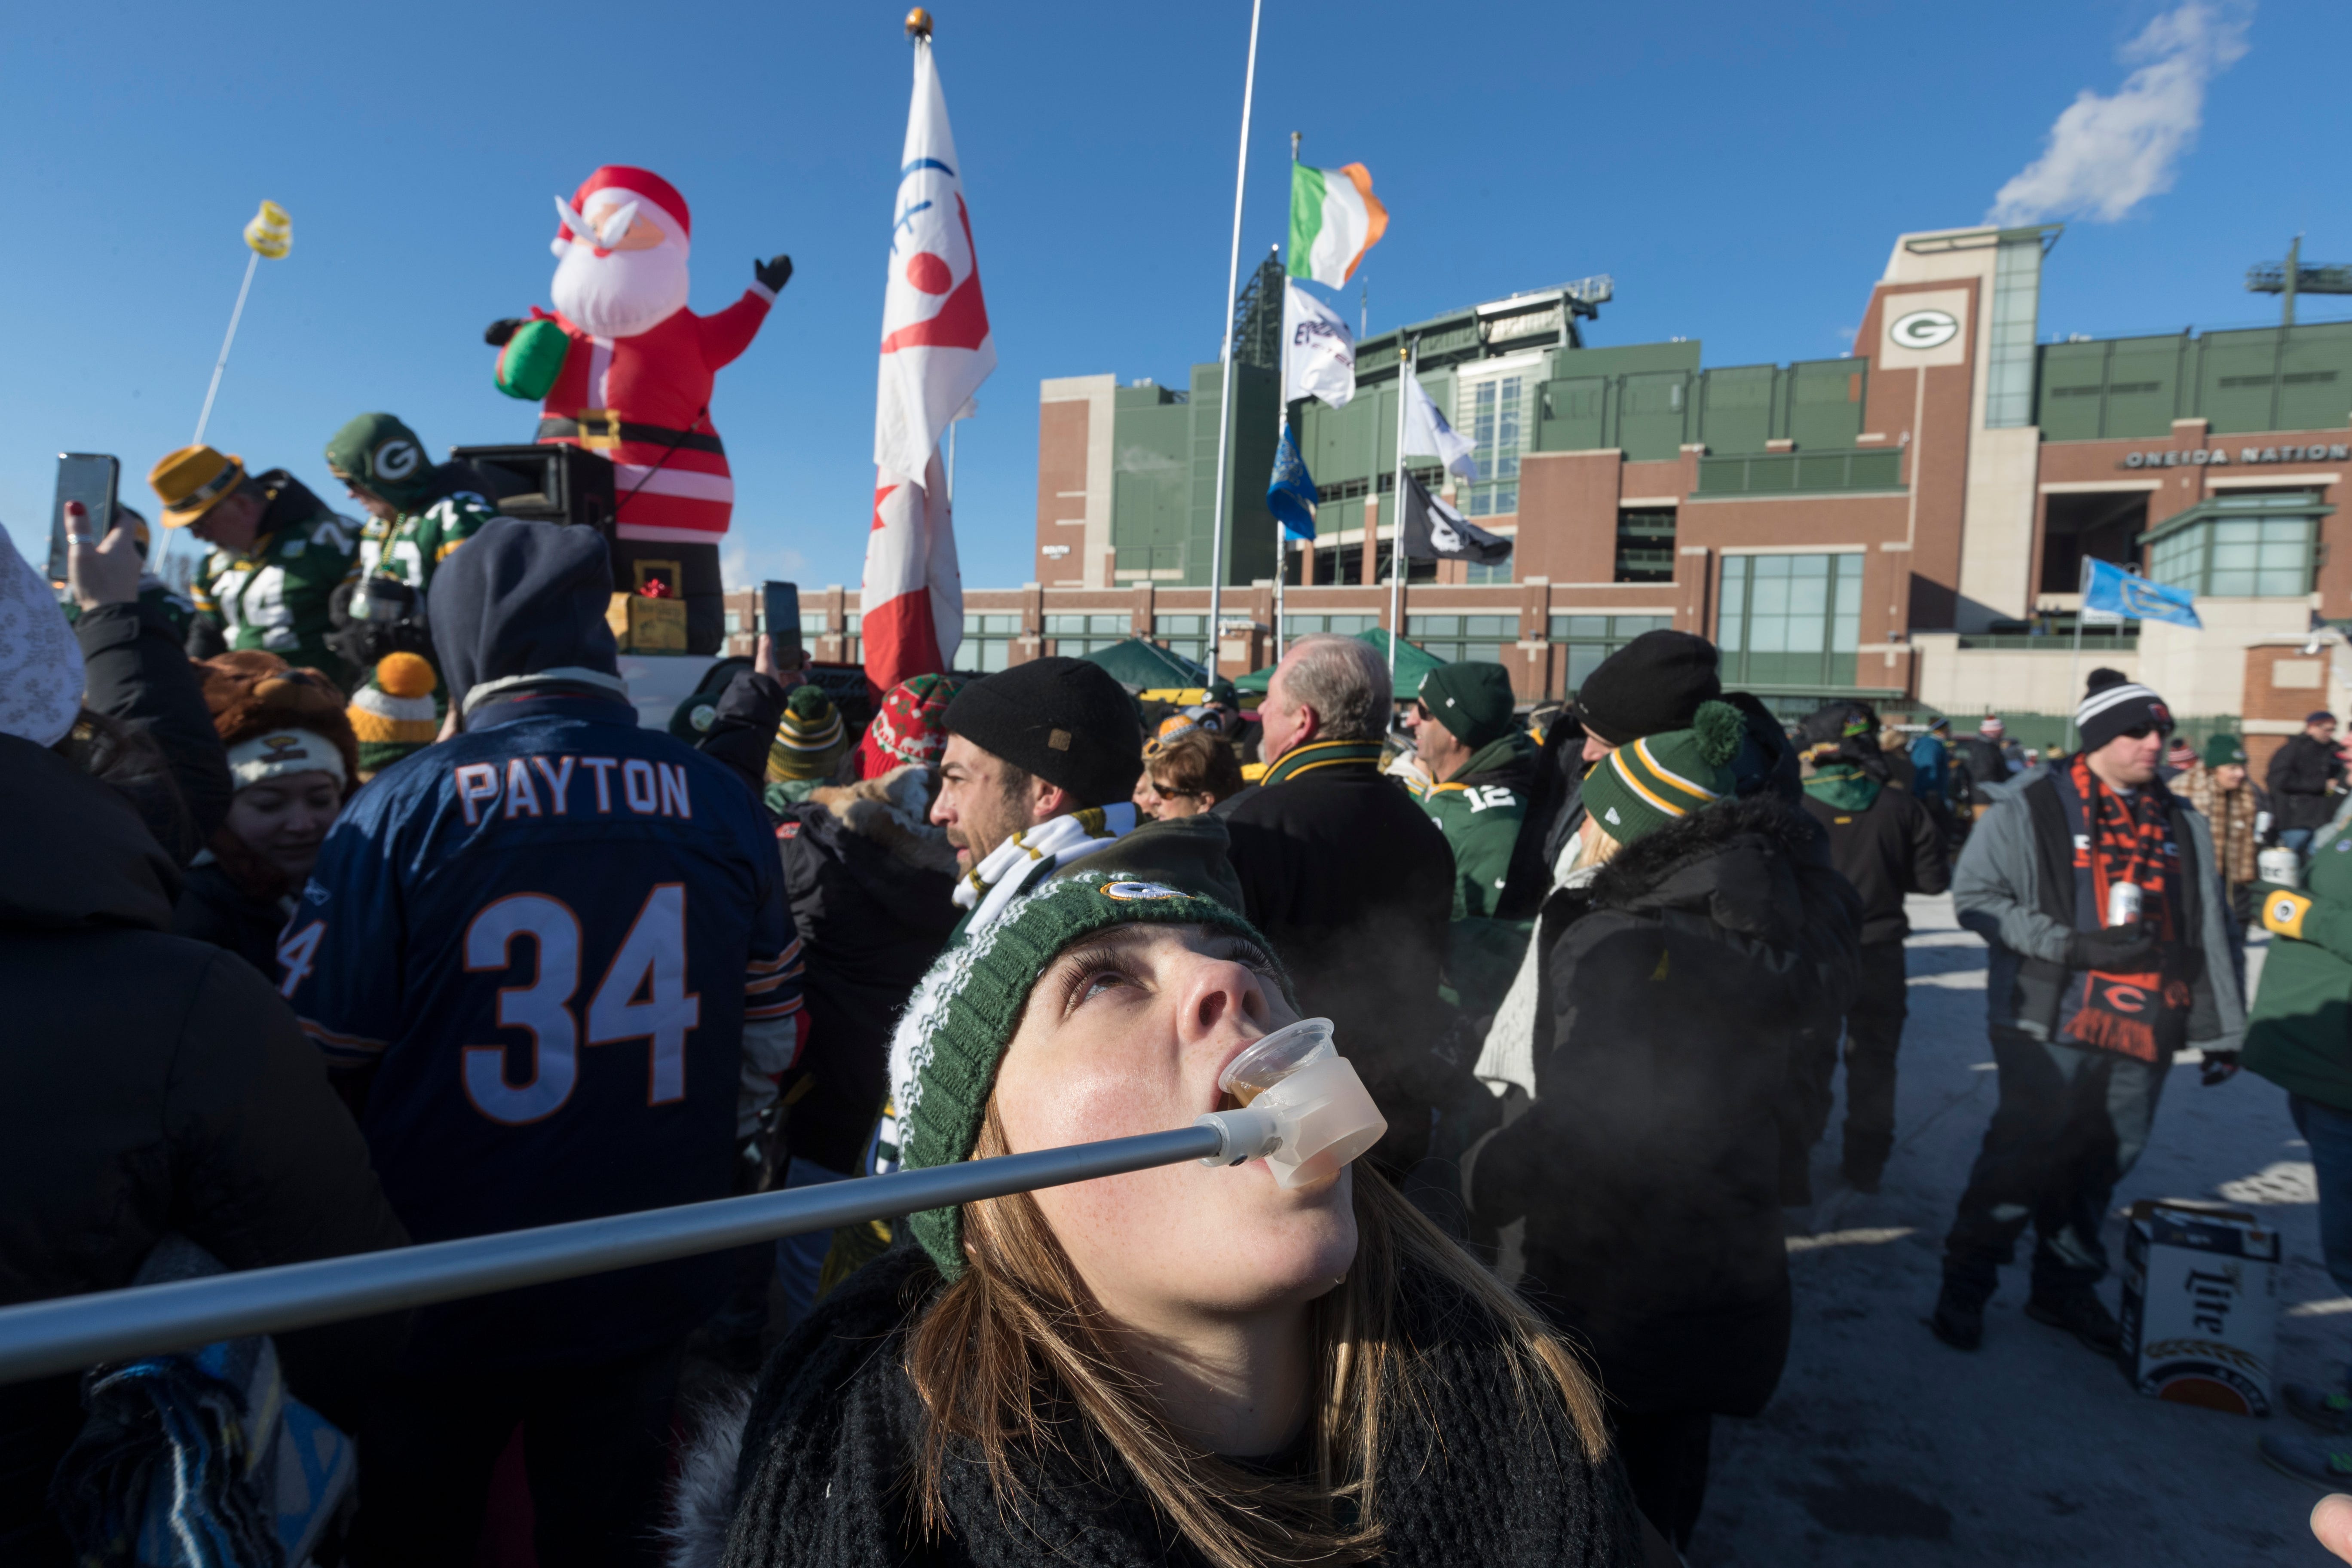 Carley Argentieri is delivered a shot on long pole while tailgating before the Green Bay Packers game against the Chicago Bears Sunday, December 15, 2019 at Lambeau Field in Green Bay, Wis. She is from Rochester, NY.